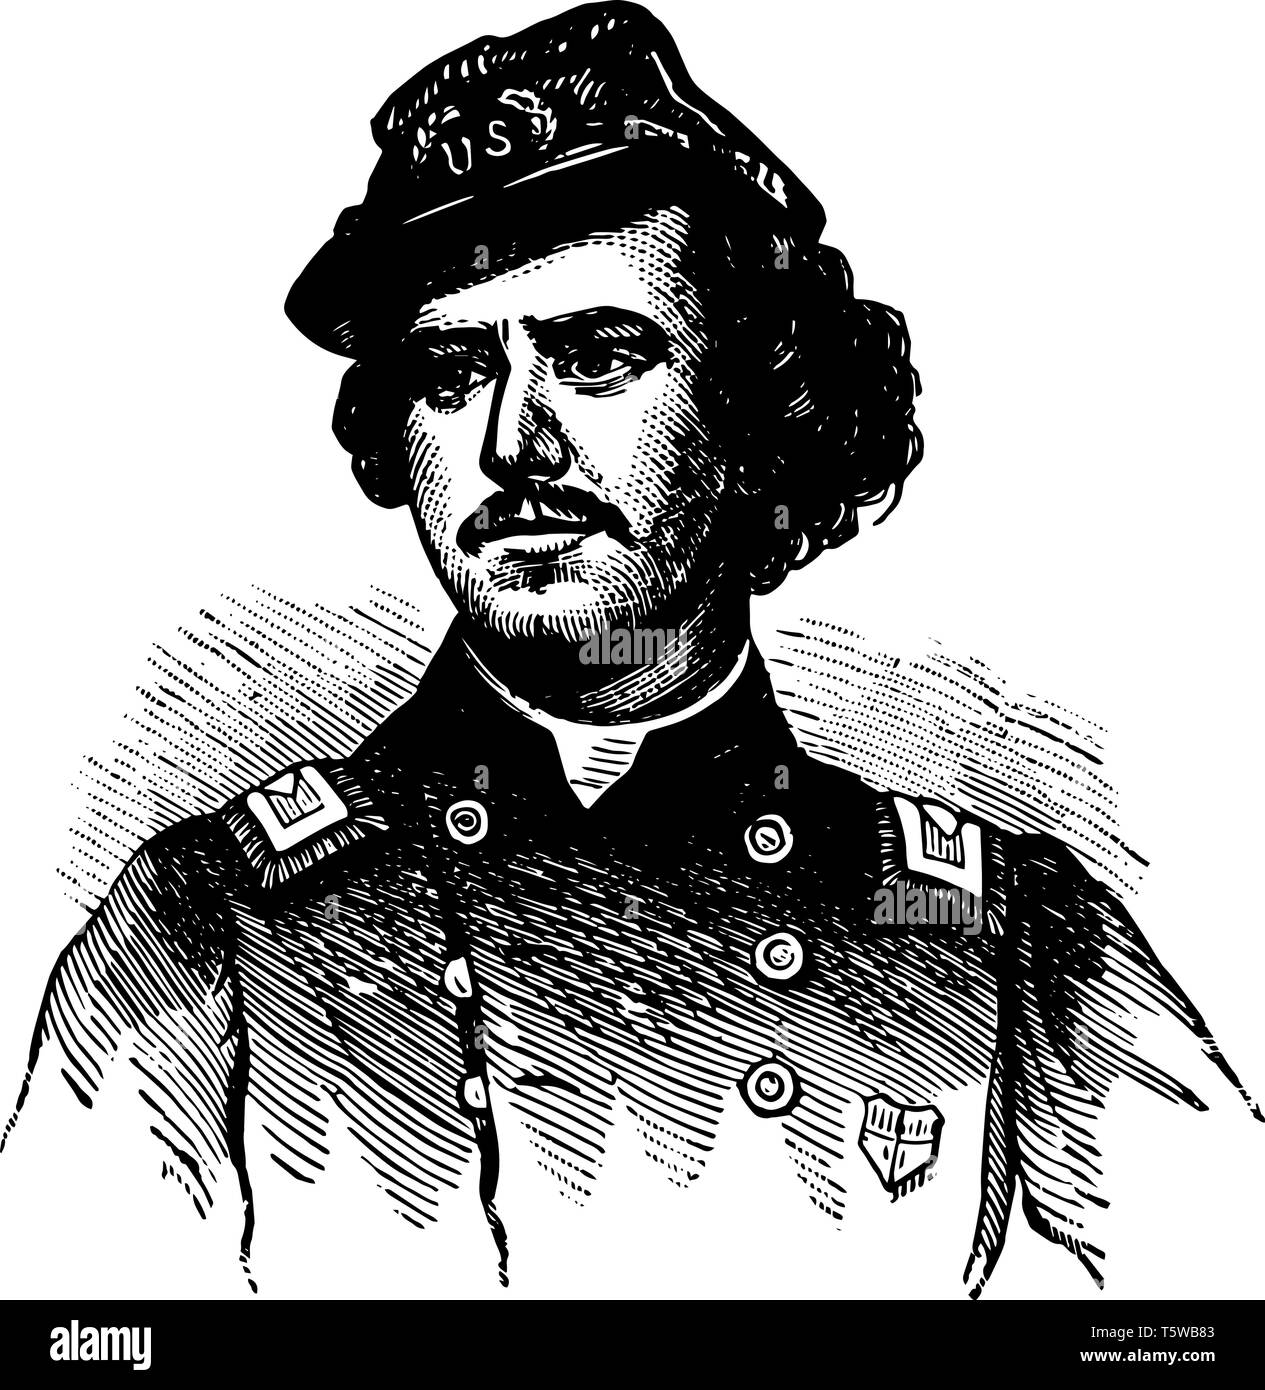 Ephraim Elmer Ellsworth 1837 to 1861 he was a lawyer and American soldier famous as the first conspicuous casualty and the first Union officer killed  Stock Vector